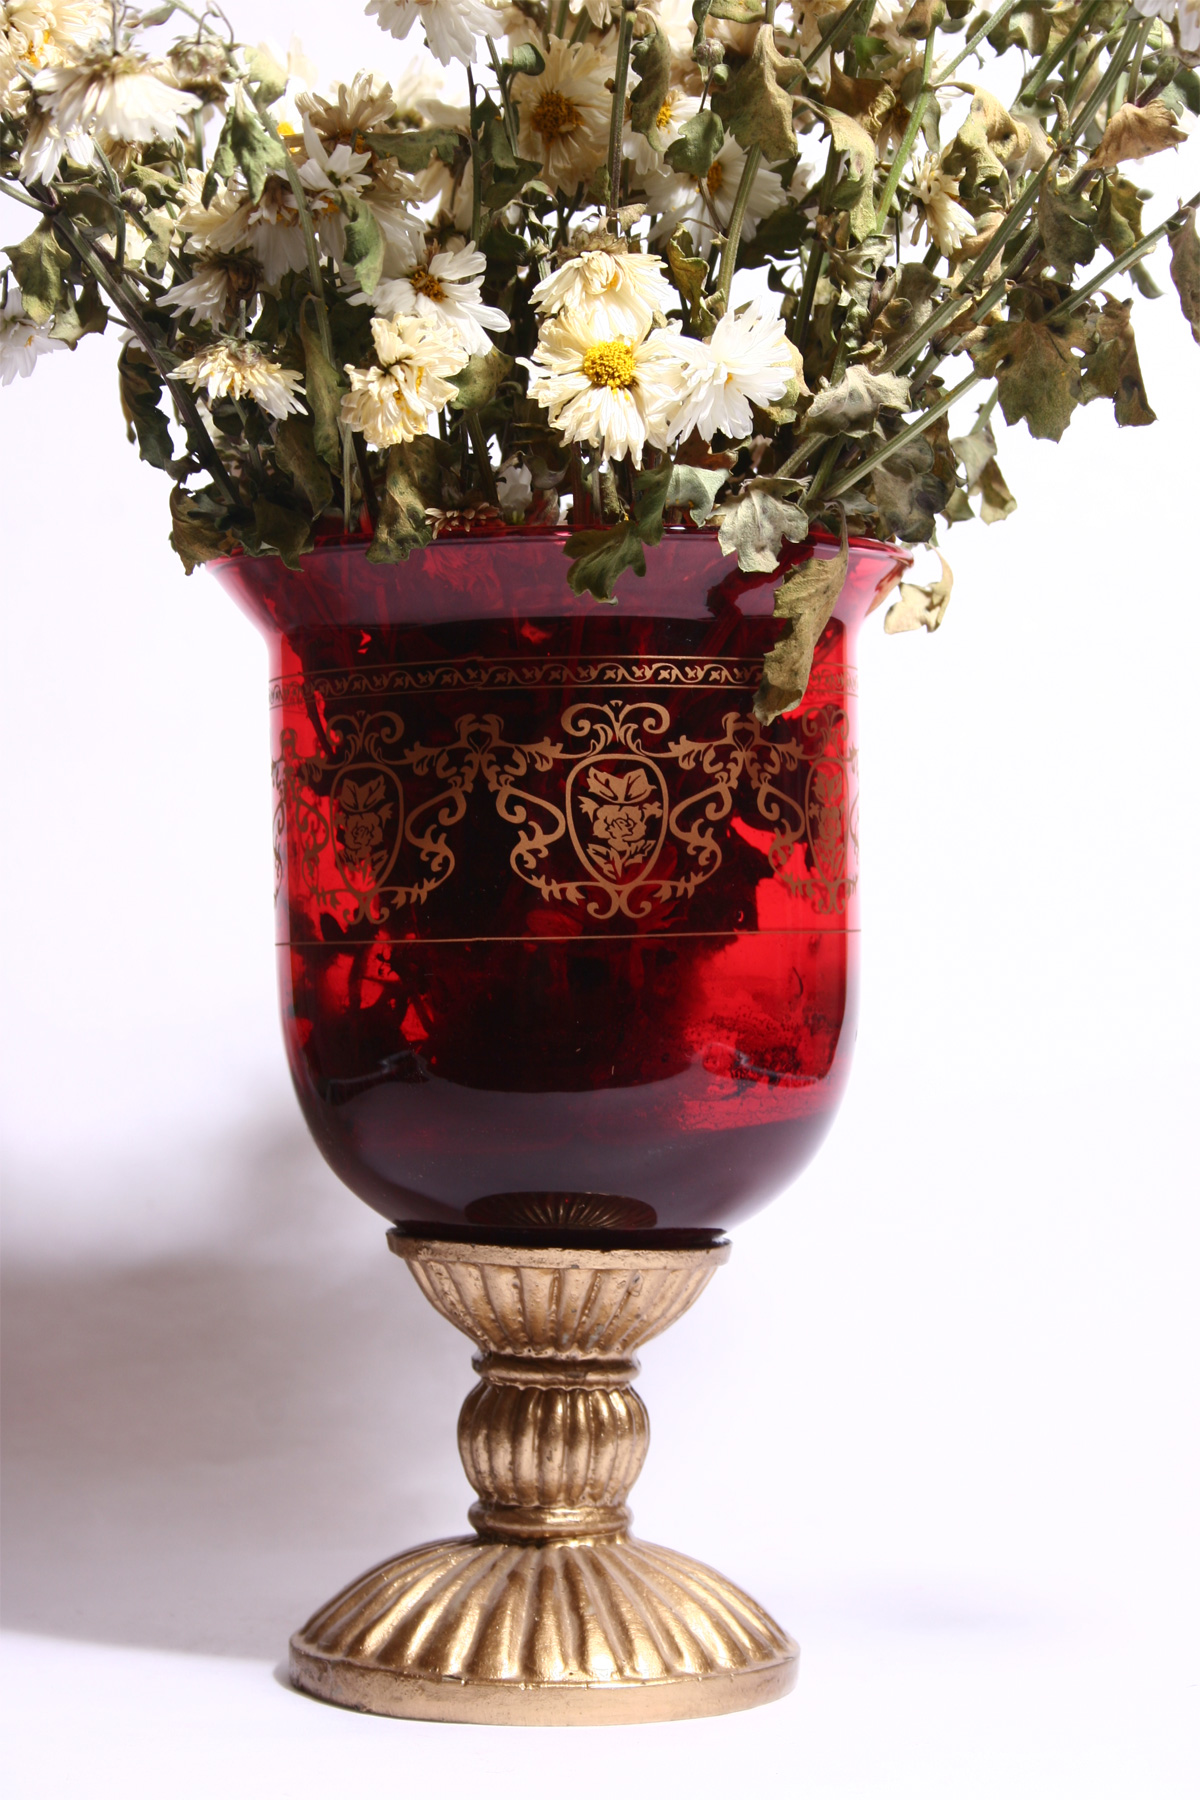 Old vase with dead flowers